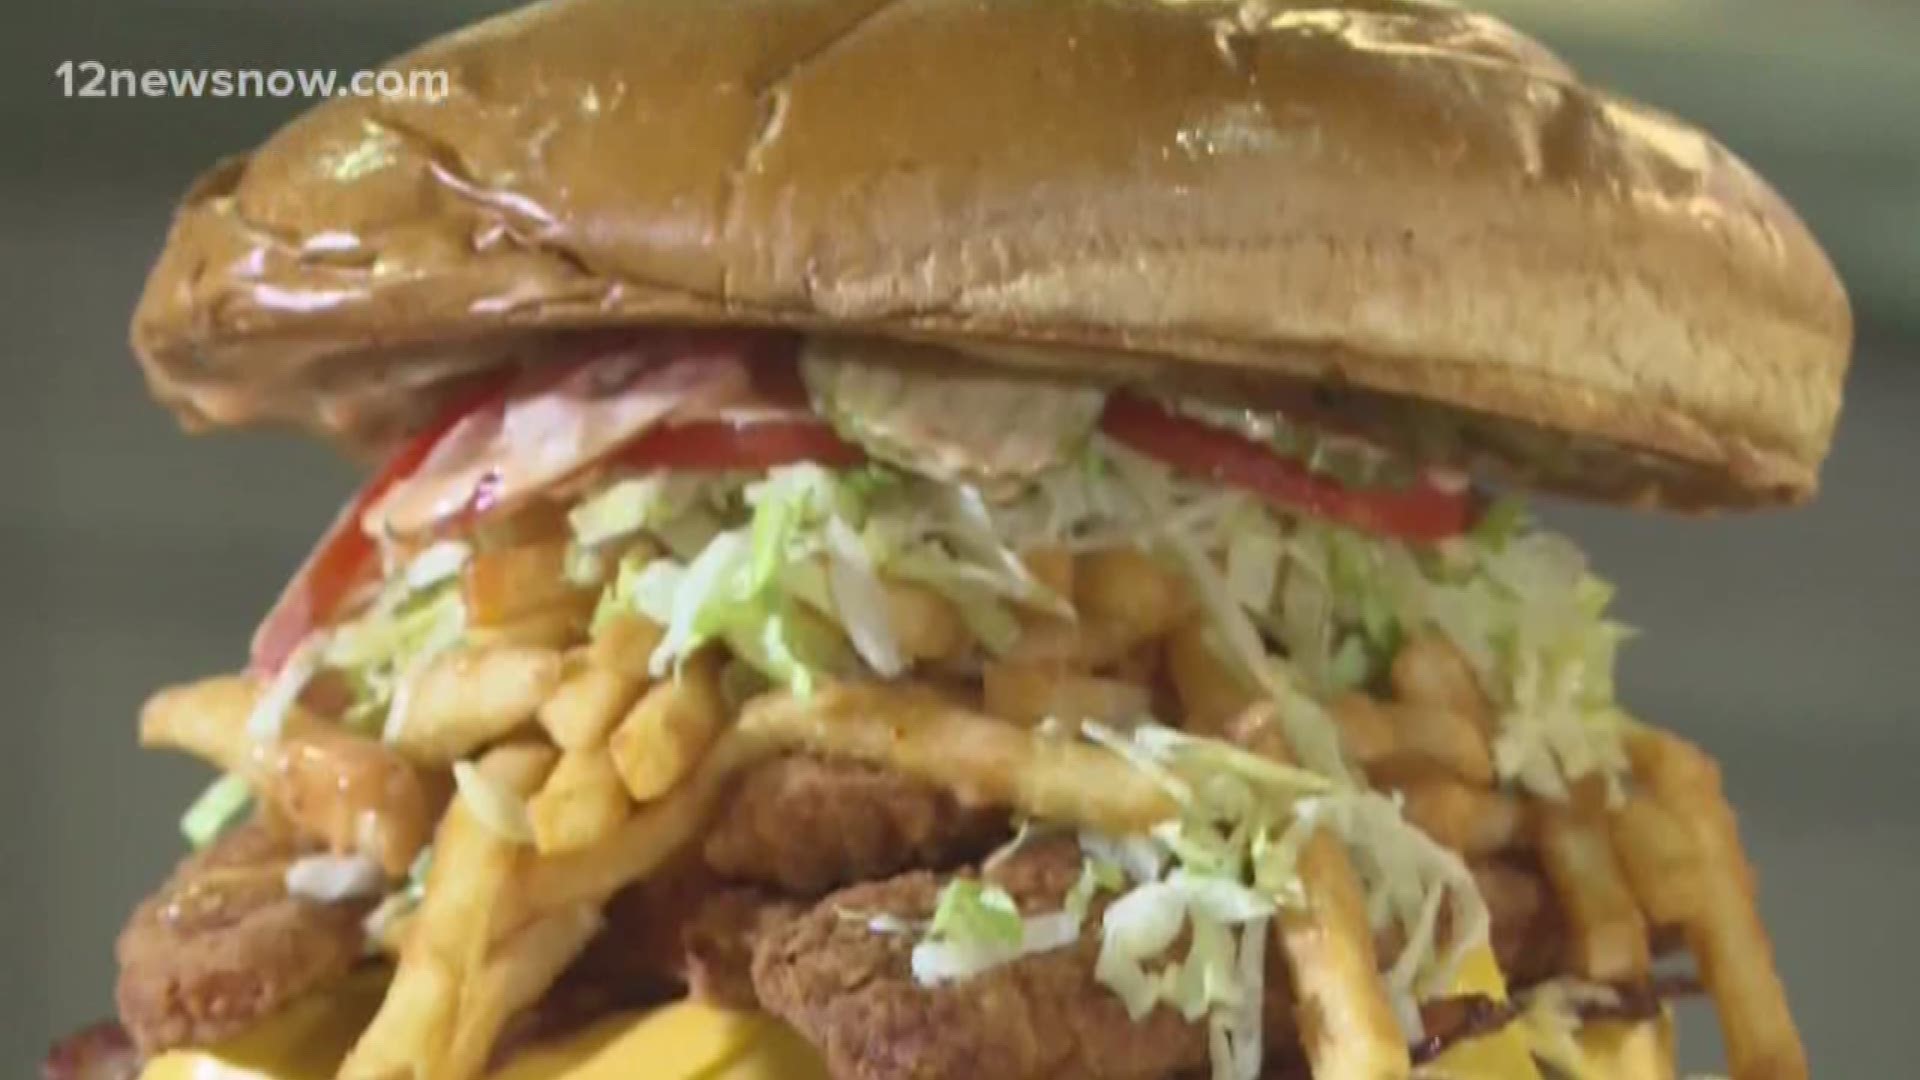 Football fans can take on the Gridiron Burger Challenge.